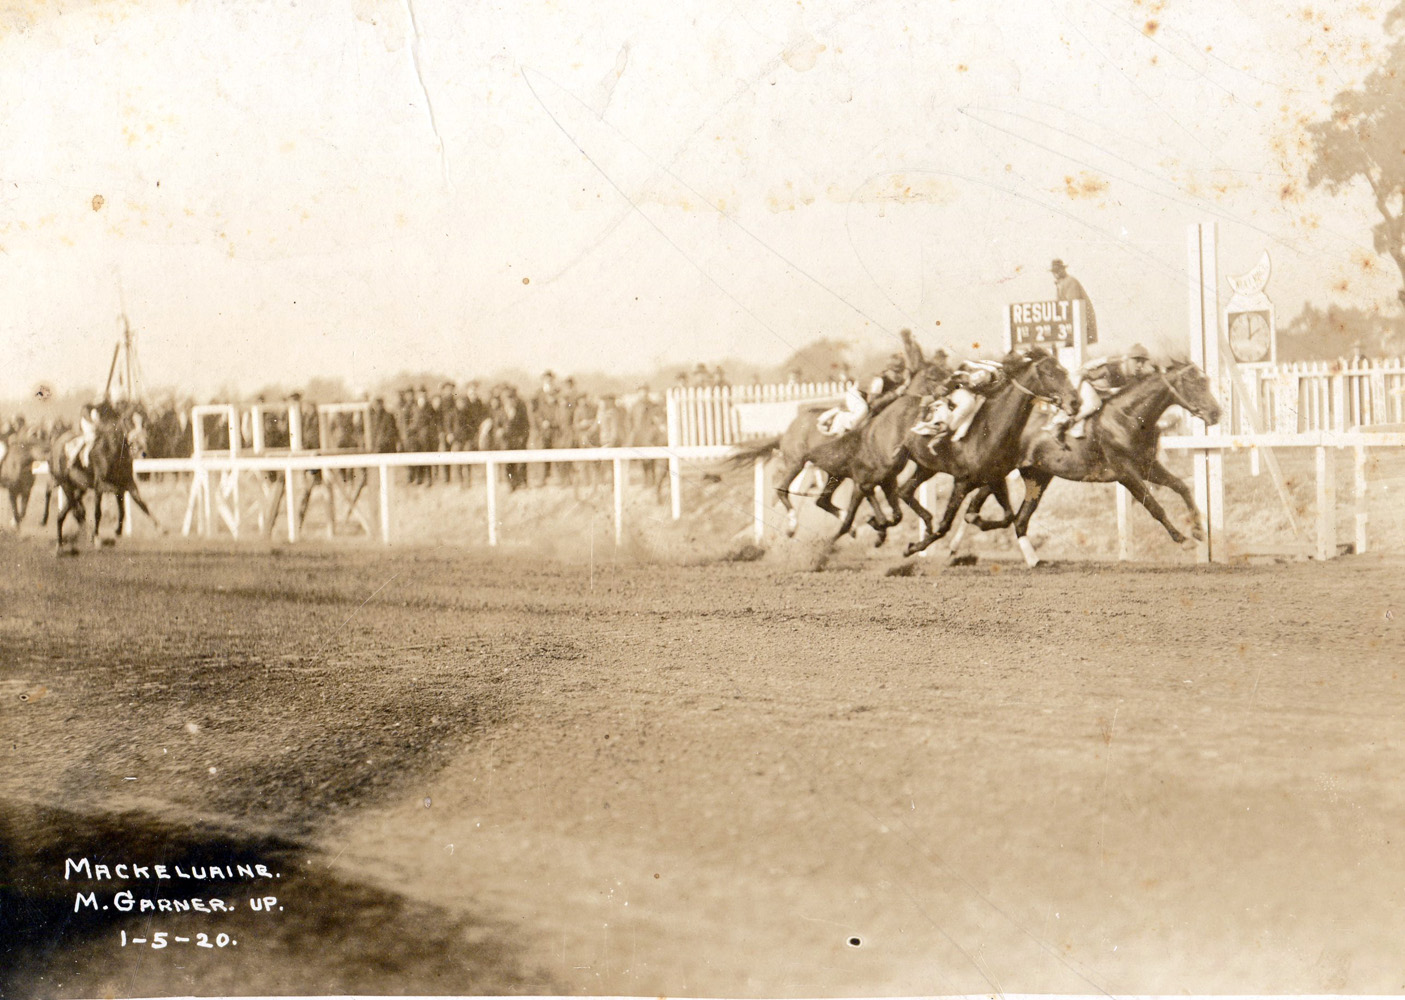 Mack Garner and Mackekvaine winning the first race at New Orleans on January 5, 1920 (Museum Collection)